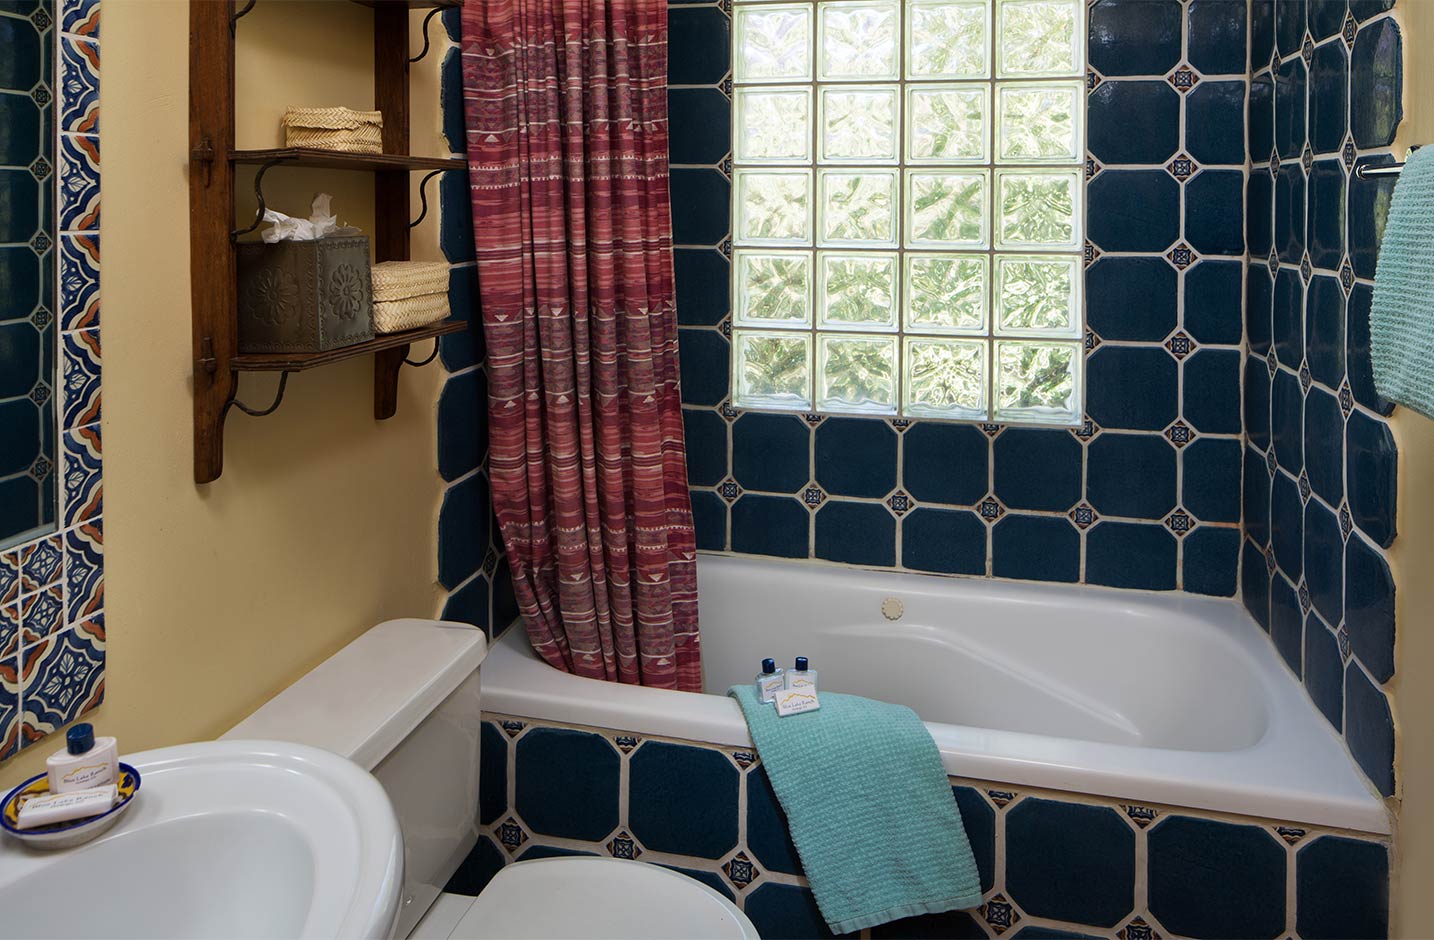 A blue tiled bathroom with large tub and window